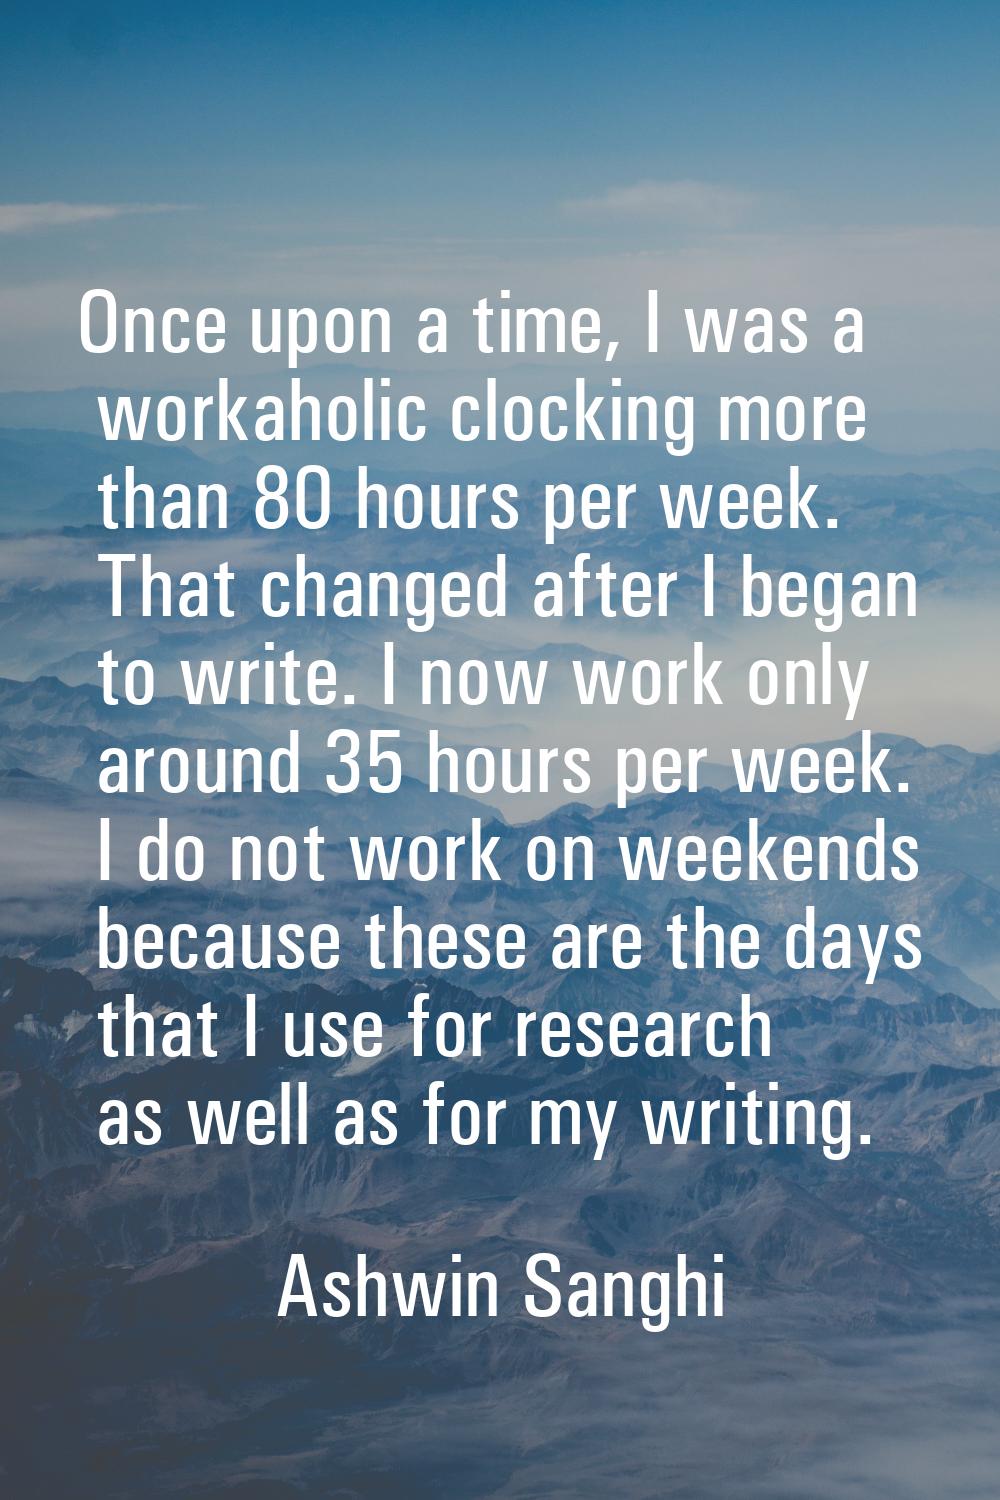 Once upon a time, I was a workaholic clocking more than 80 hours per week. That changed after I beg